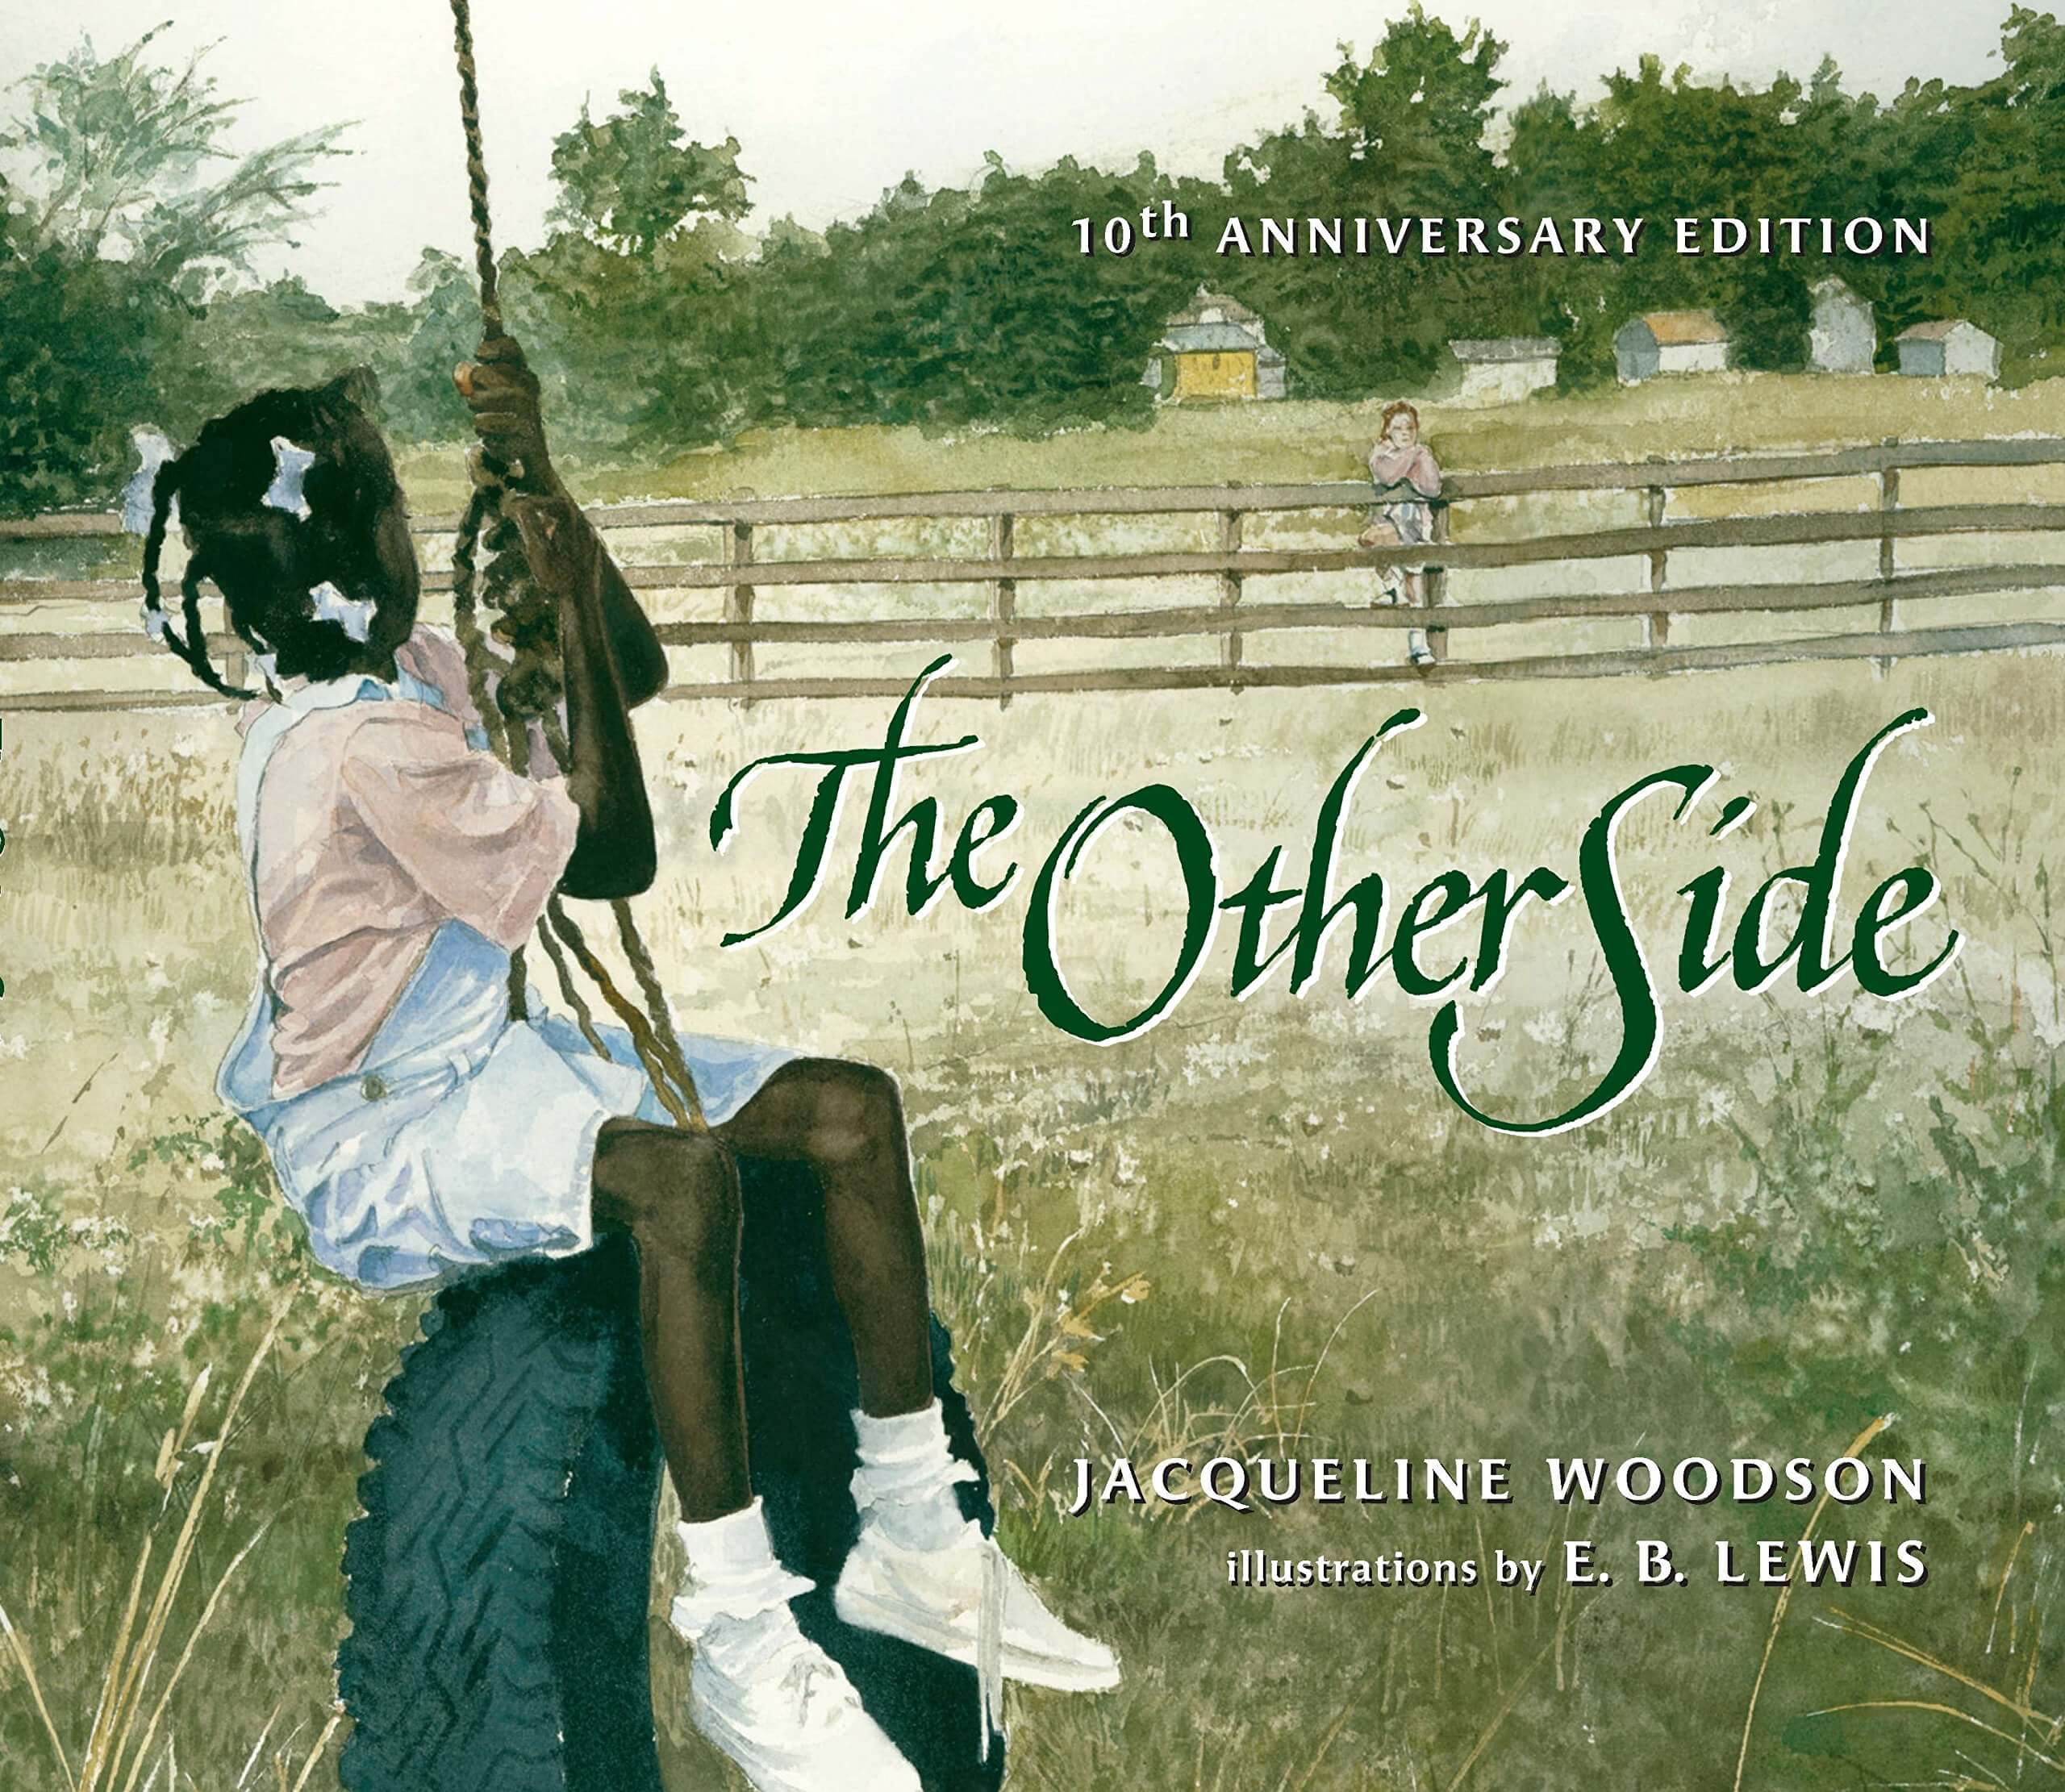 The Other Side, by Jacqueline Woodson, Illustrated by E.B Lewis